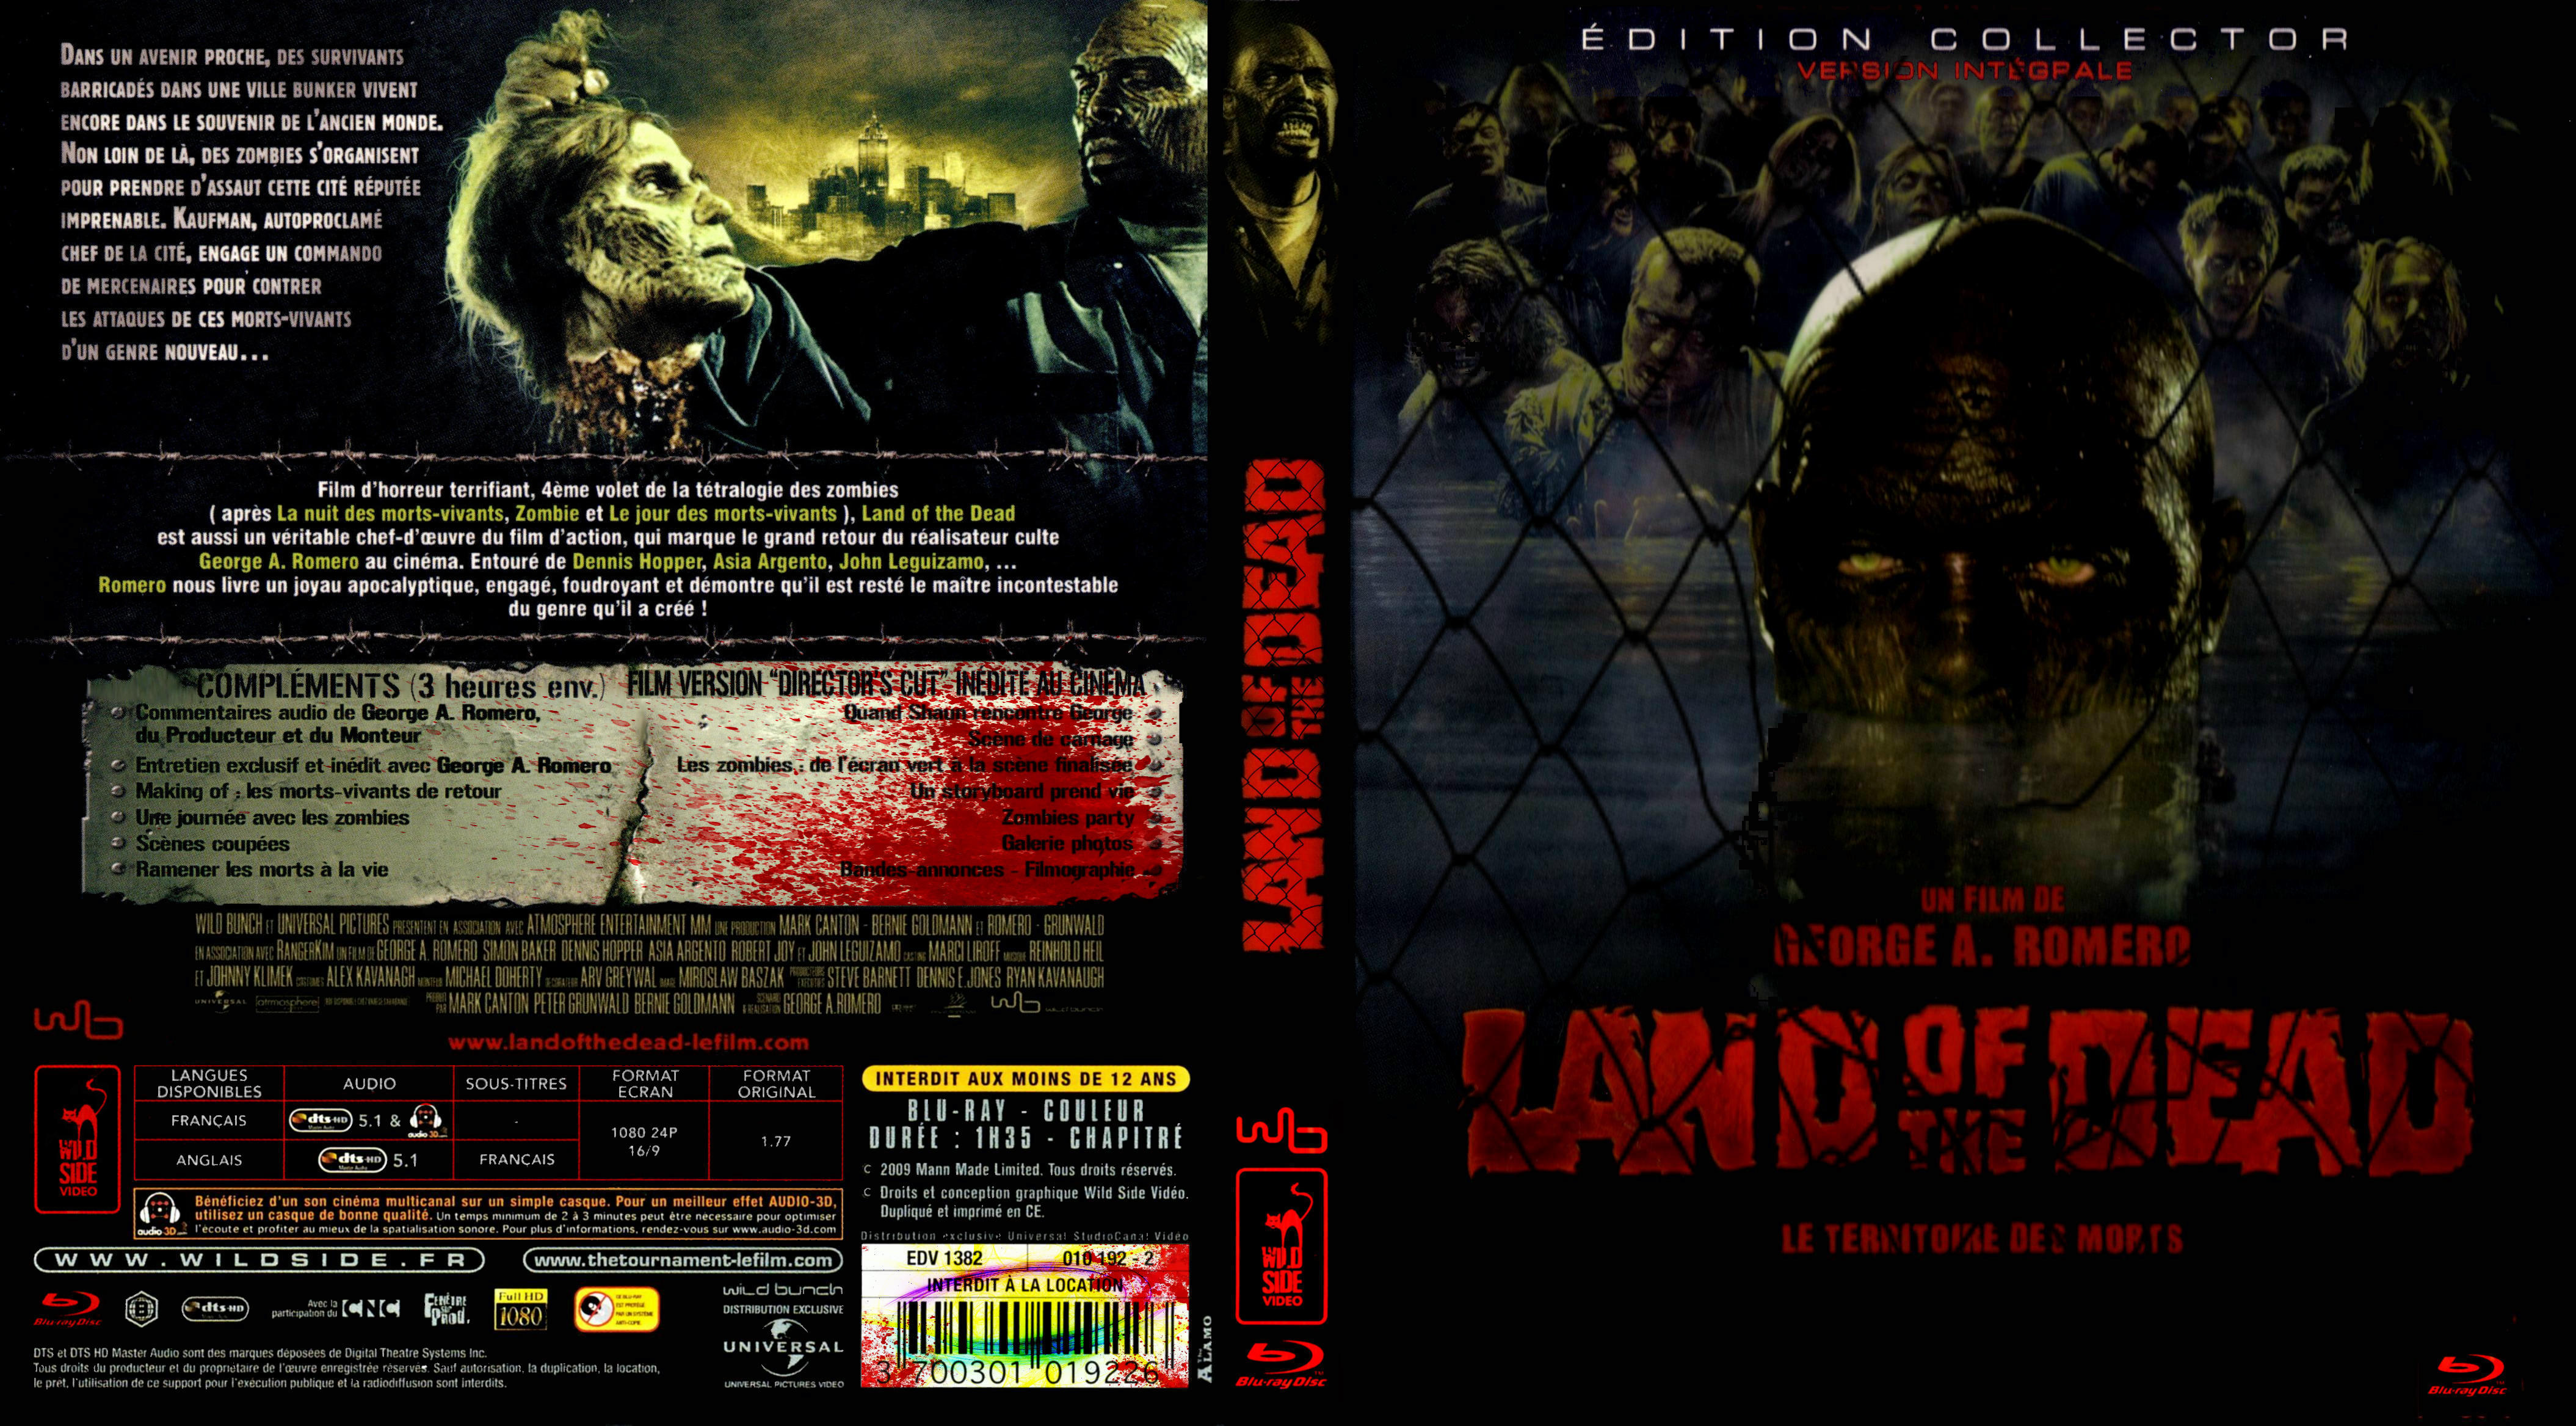 Jaquette DVD Land of the dead custom (BLU-RAY) v2